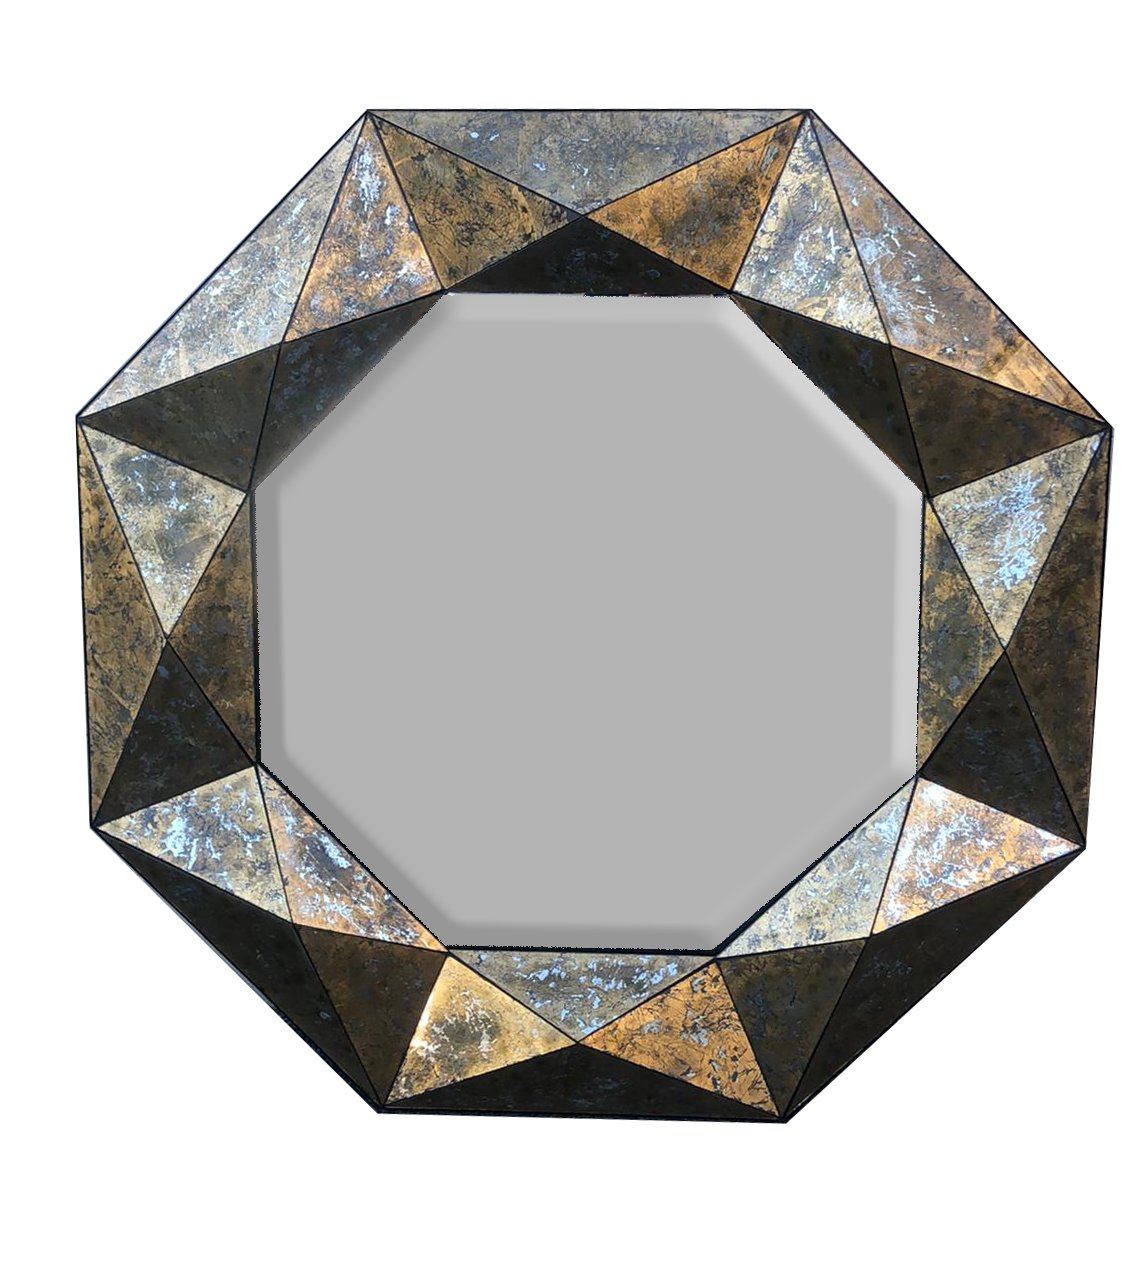 AFD Large Octagonal Eglomise 48" Mirror Mirrors AFD GLASS 